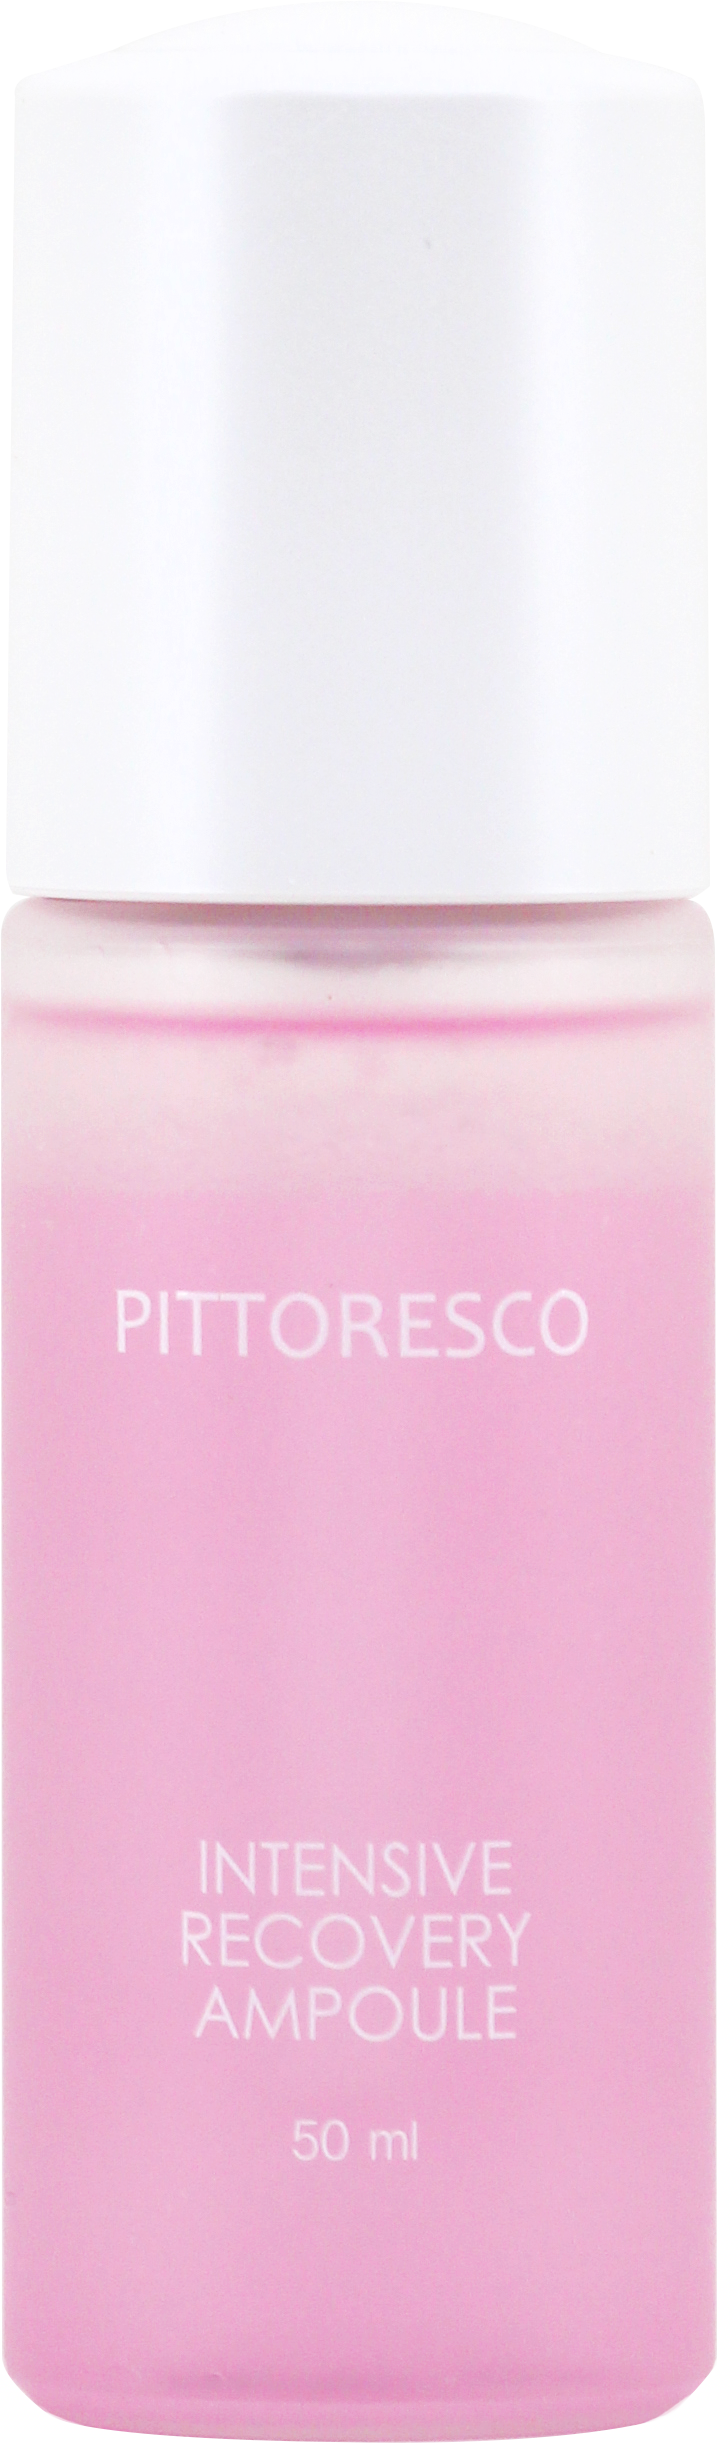 [Pittoresco] recovery ampoule - glass skin.